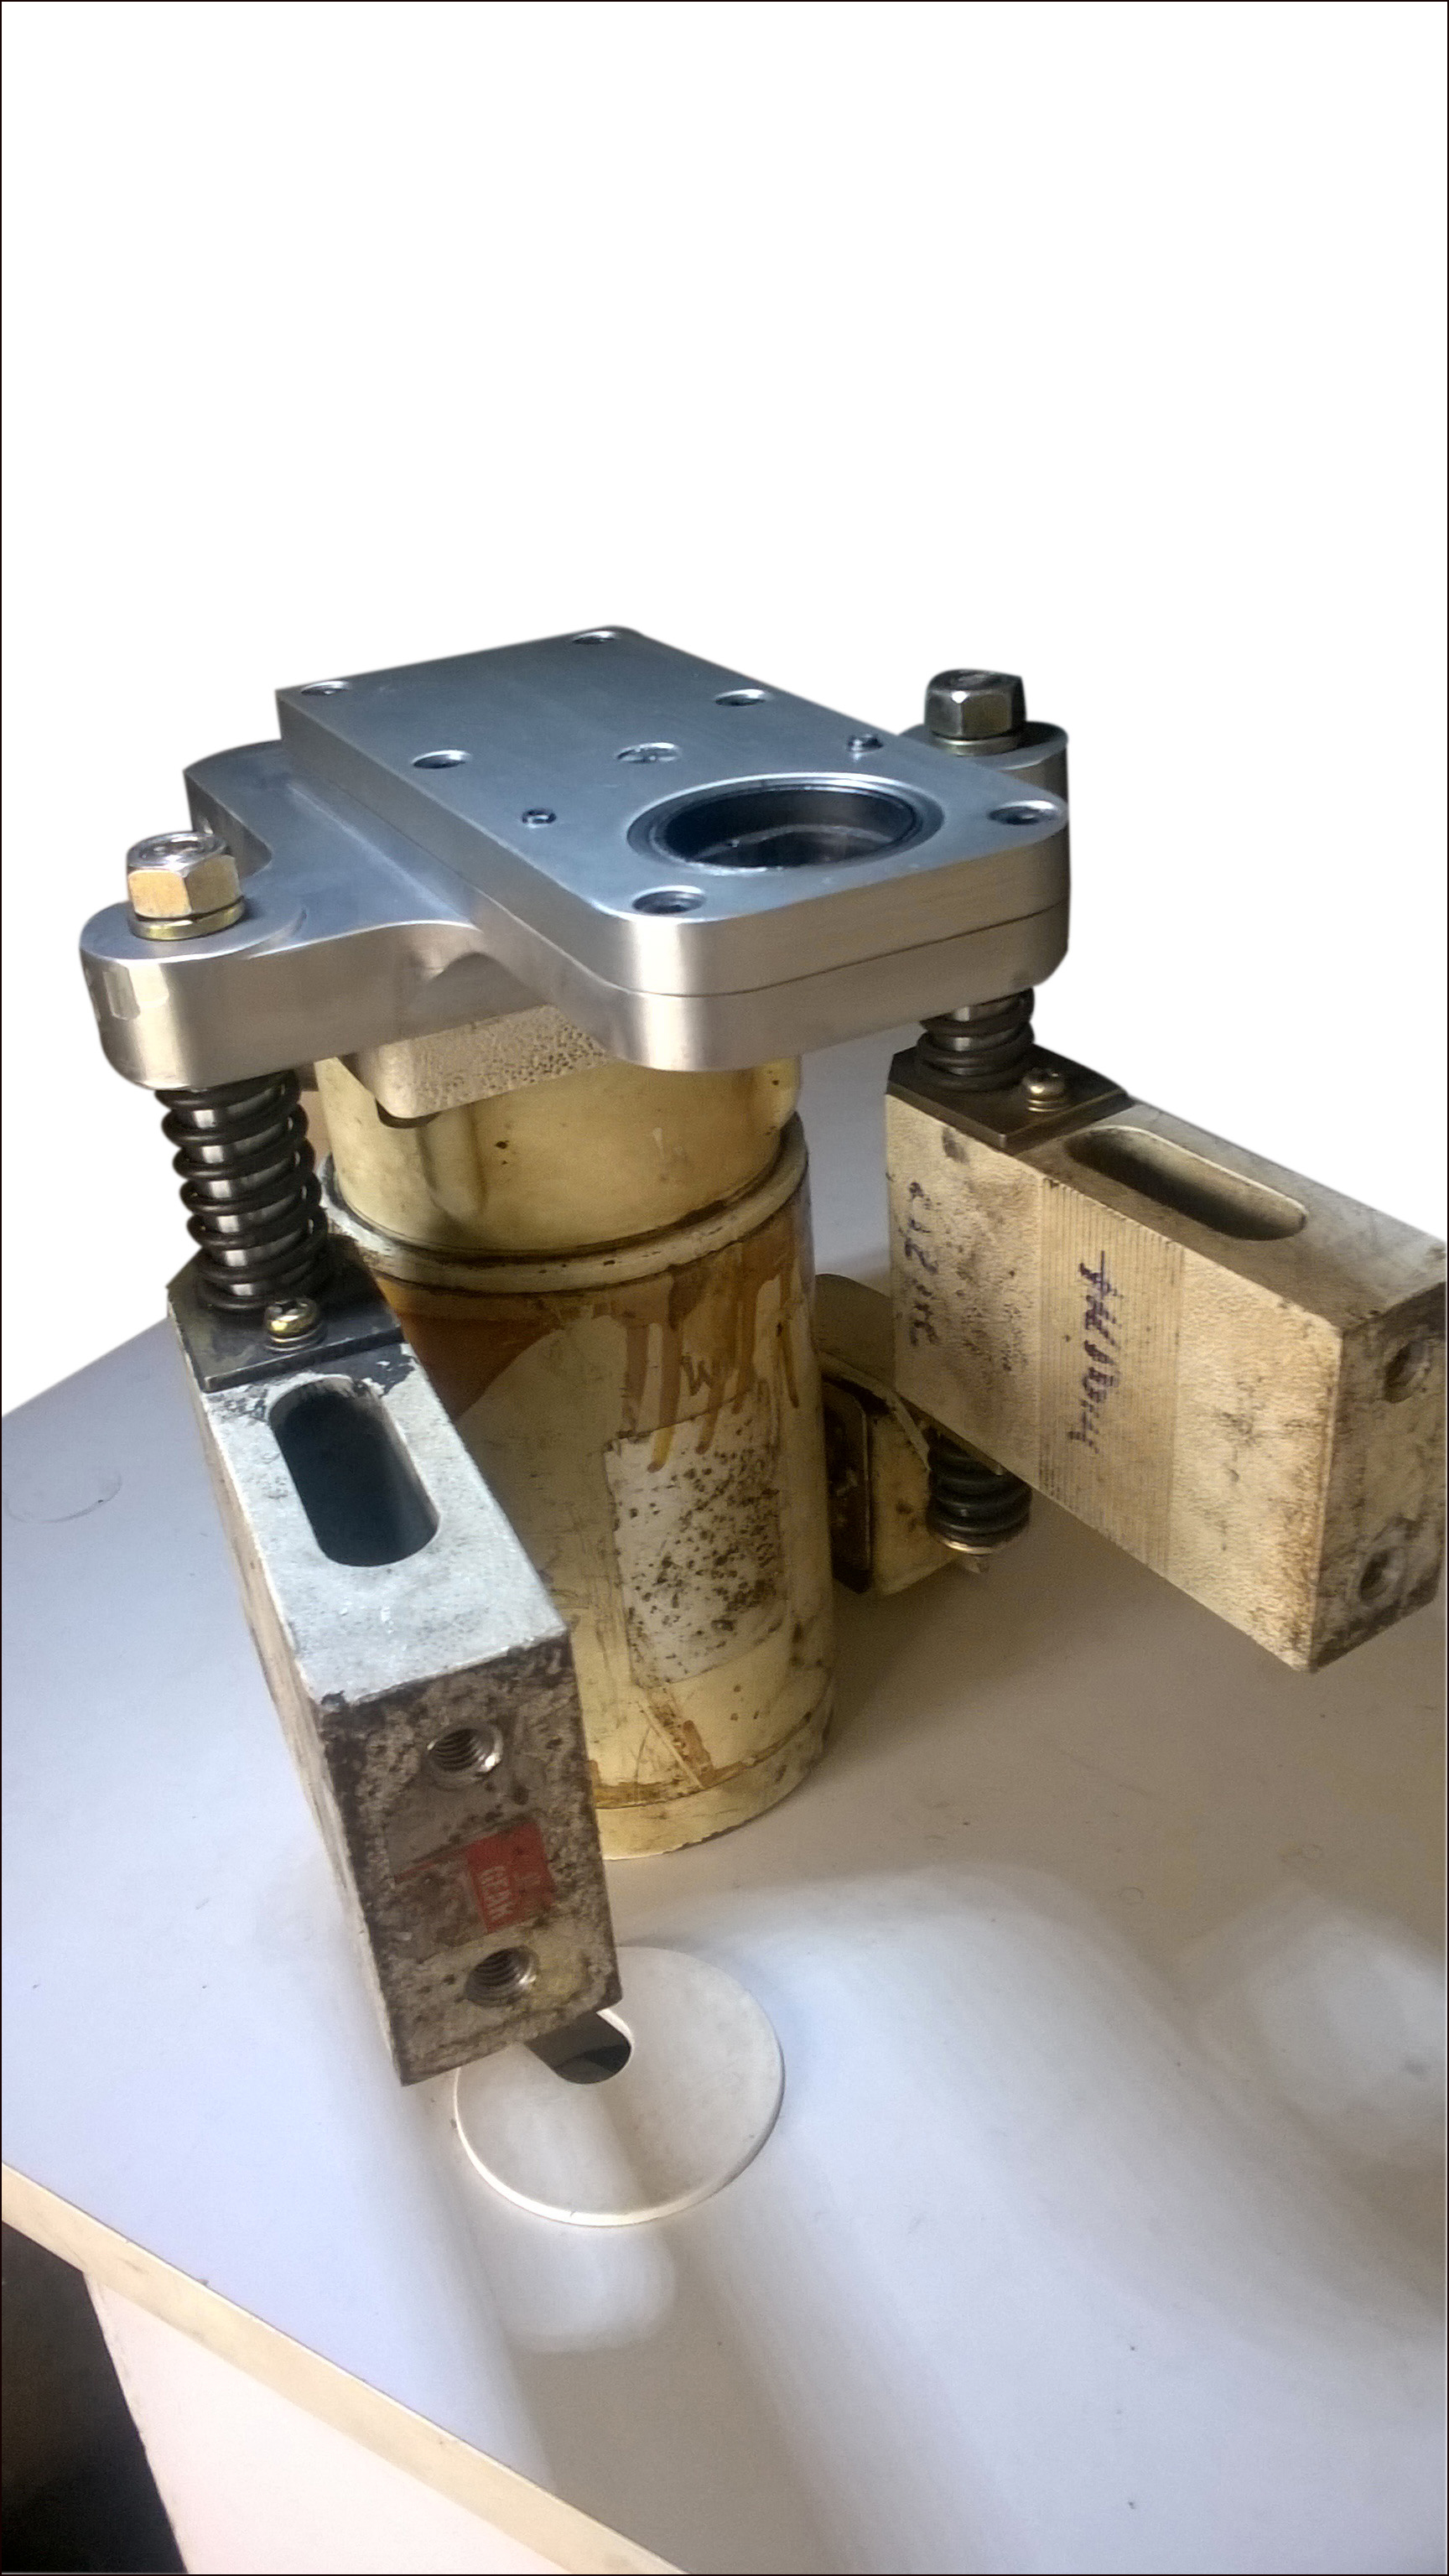 Gear box for nozzle sharpening of welding robot